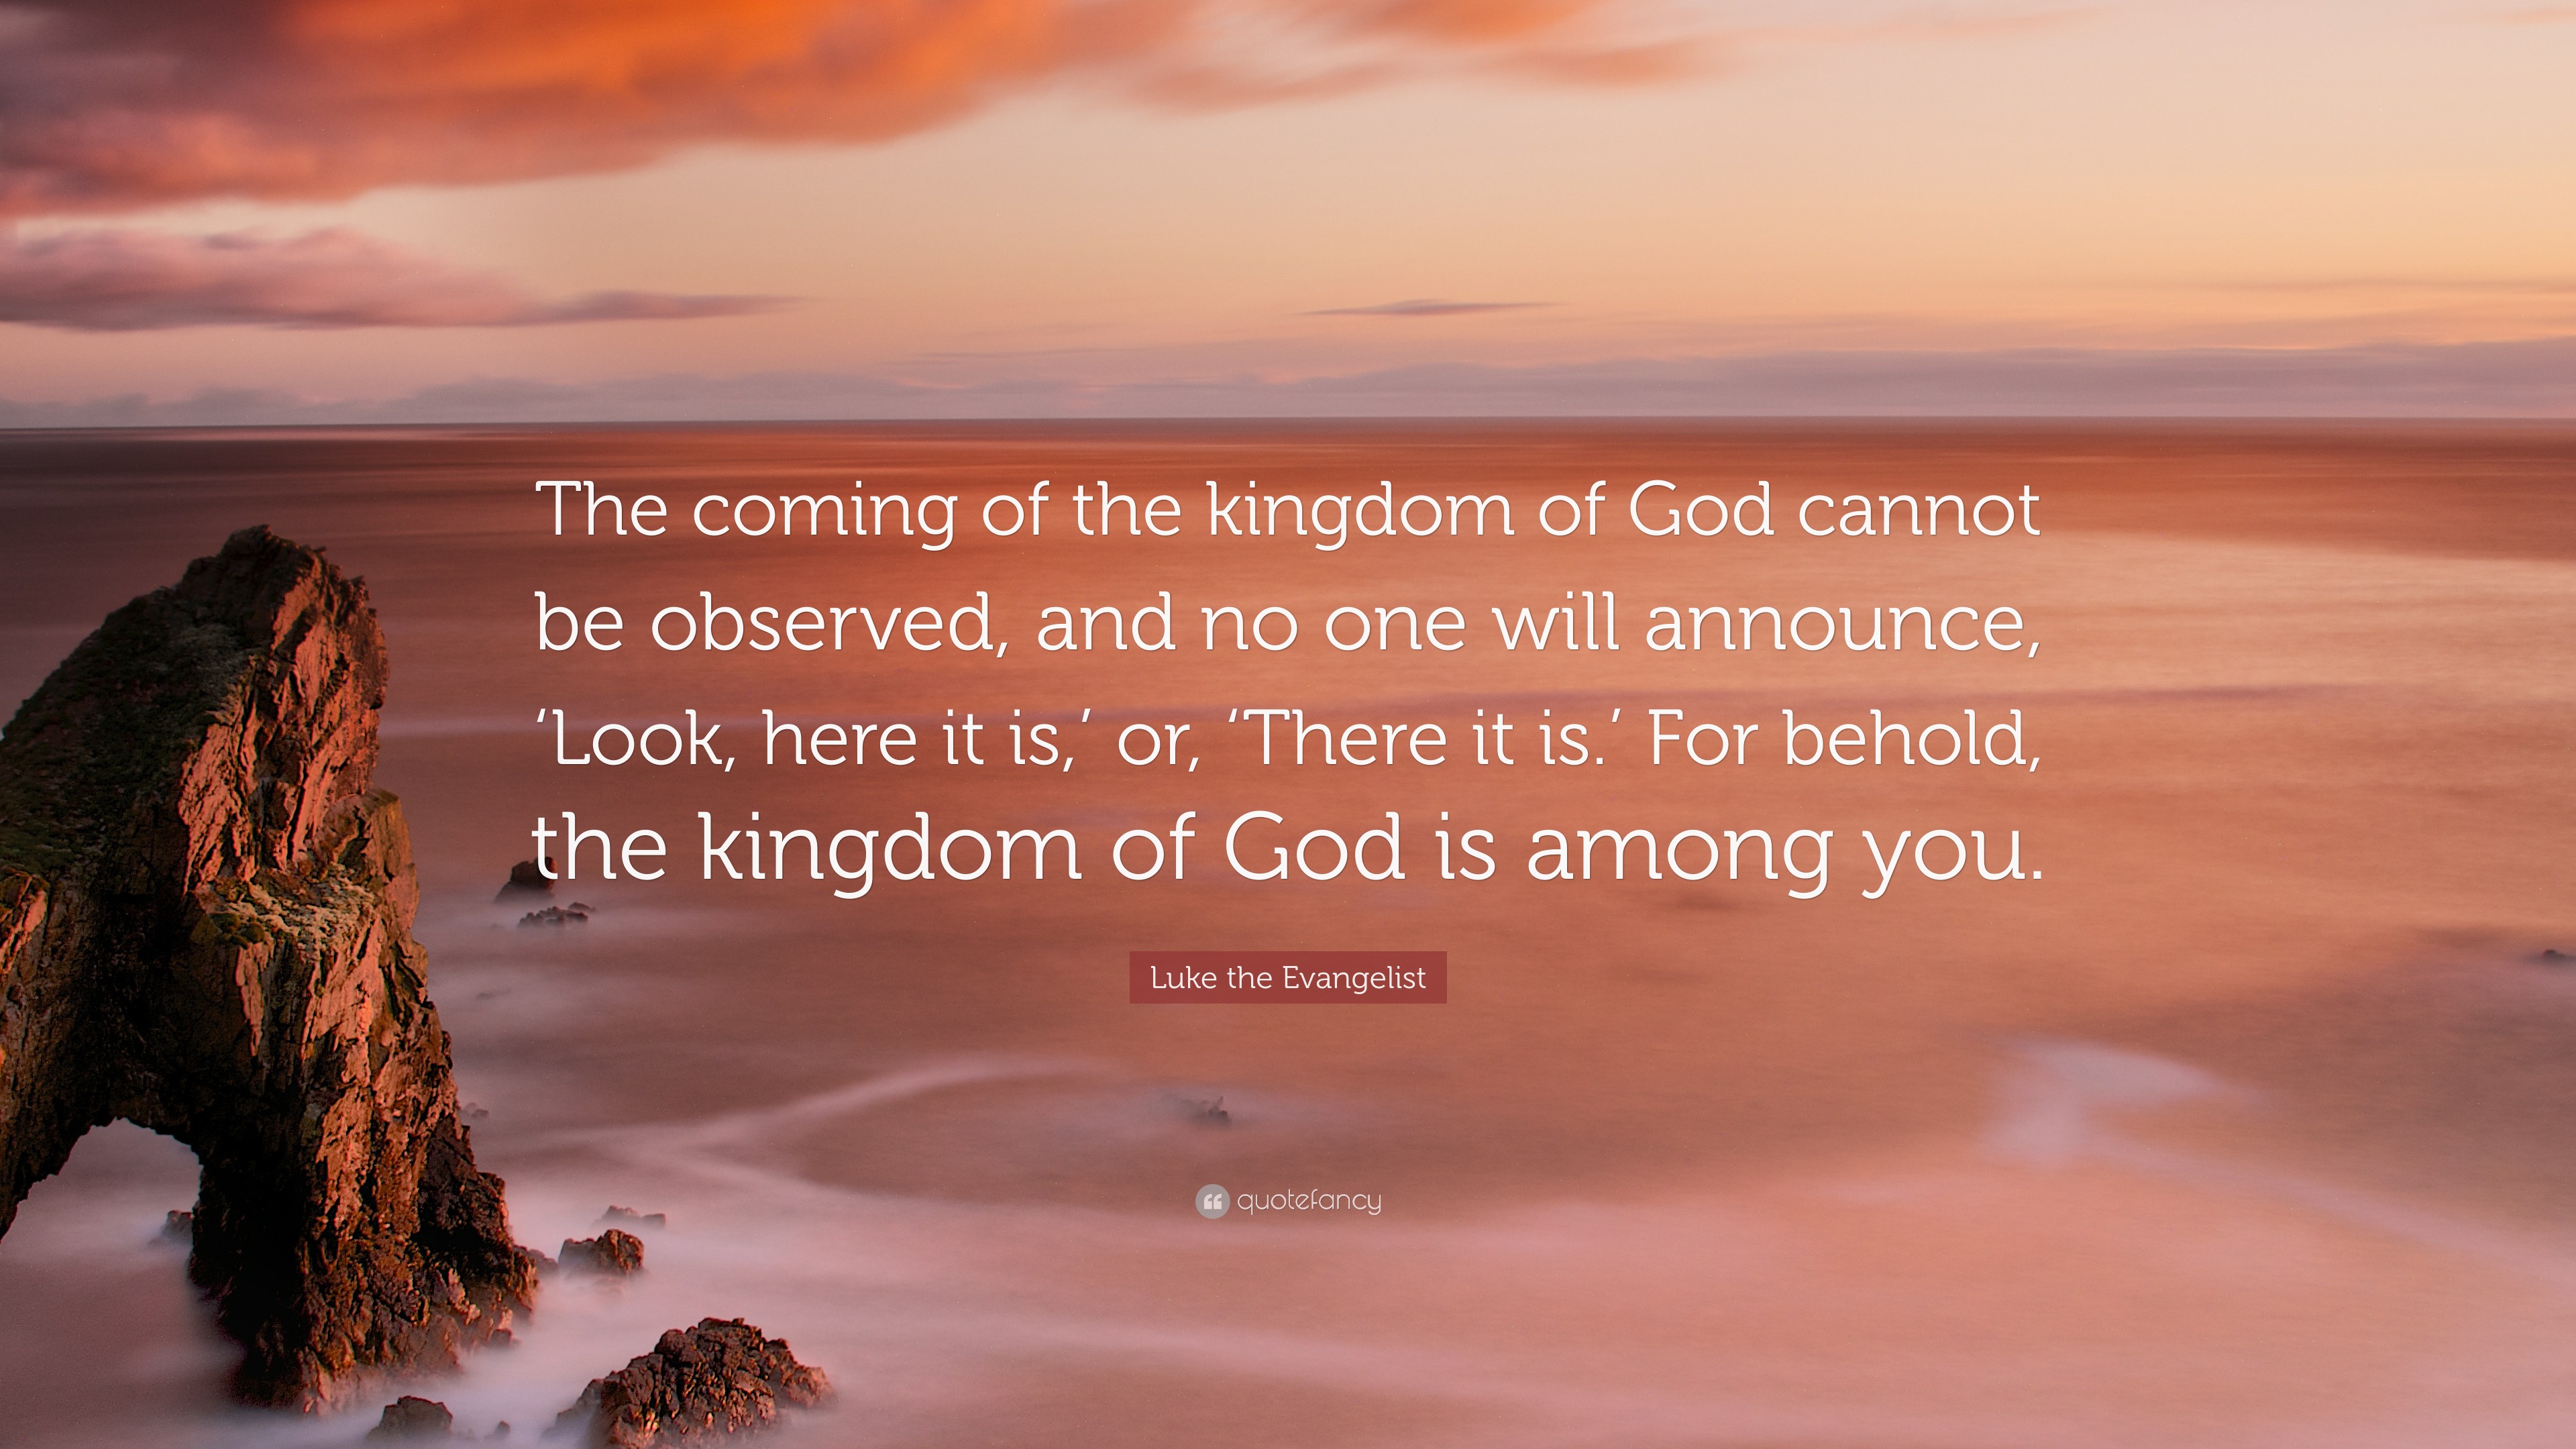 Luke the Evangelist Quote: “The coming of the kingdom of God cannot be